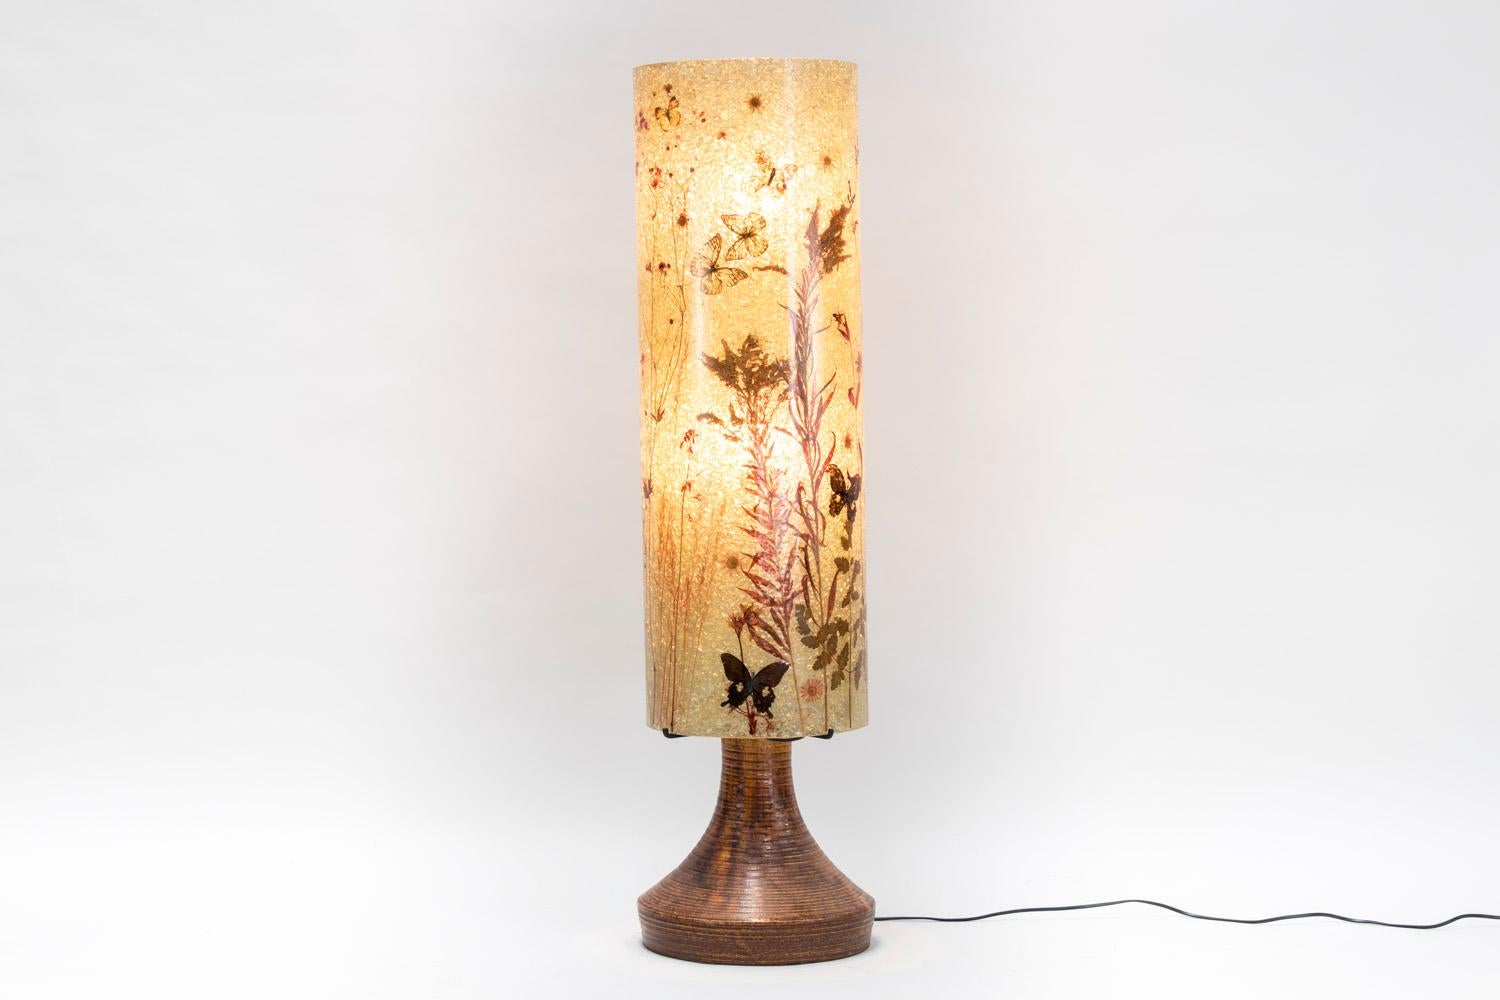 Lamp with brown ceramic round base and beige resin lampshade column shaped decorated with red patterns such as butterflies, foliage and flowers.
Signed Accolay beneath in black letters.
Work from the 1970s.
Functional electrical